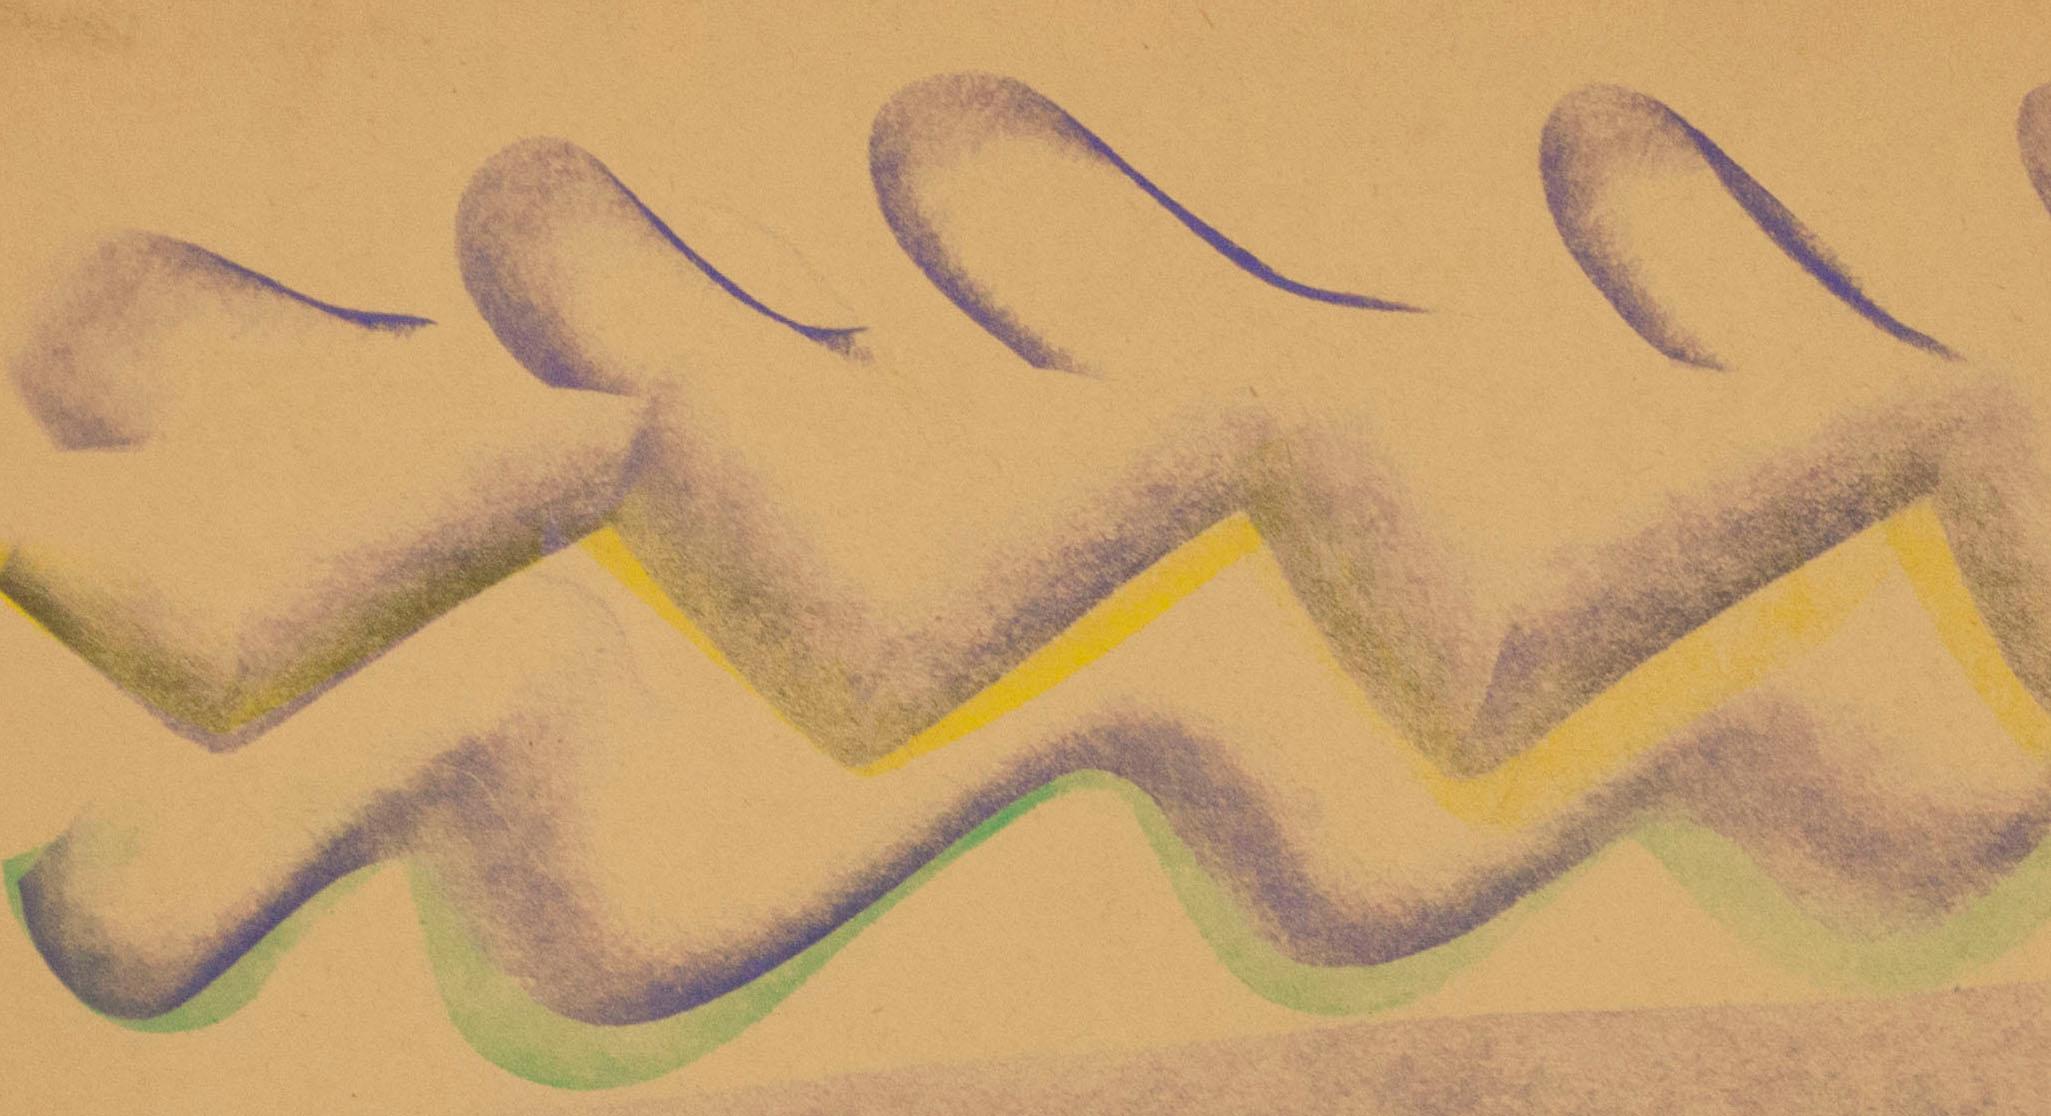 In this pastel drawing, Sylvia Spicuzza presents the viewer with a rhythmic view resembling waves and rolling hills. The colors of the repeating patterns and softness of the undulating lines recall the paintings of Georgia O'Keeffe and her abstract